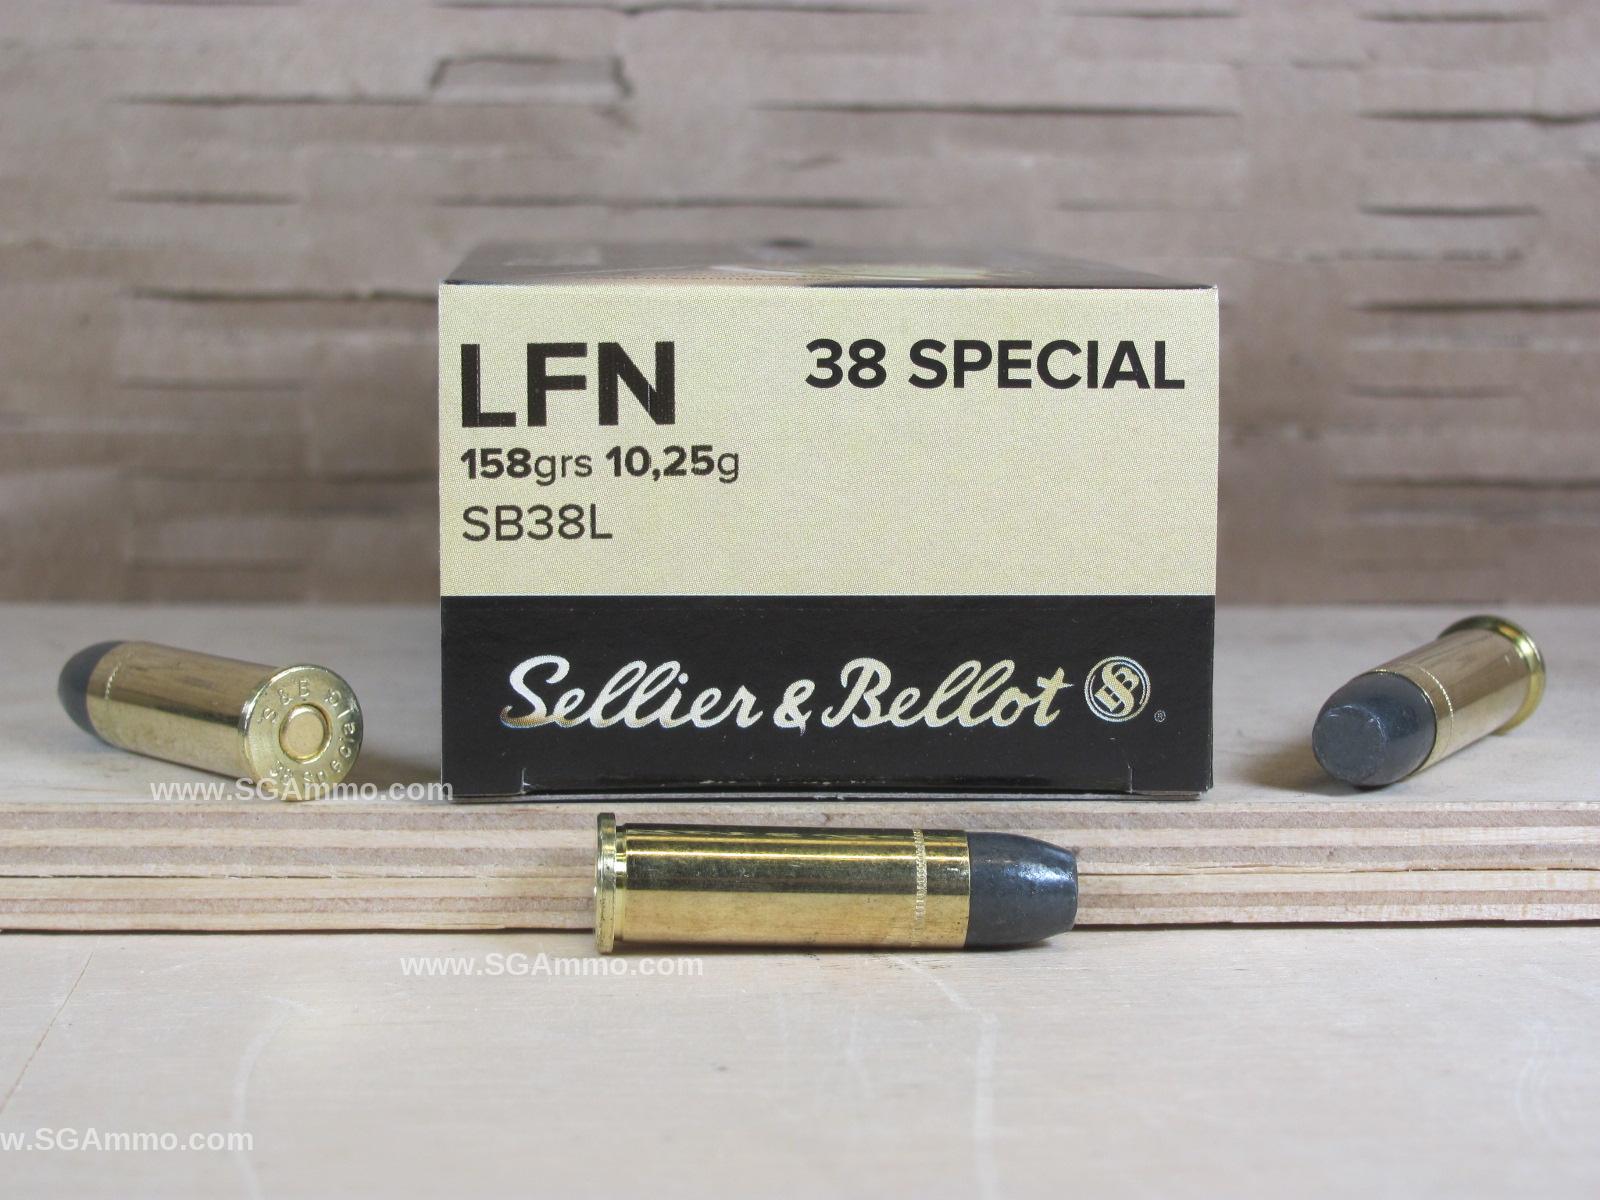 50 Round Box - 38 Special 158 Grain LFN Lead Bullet Ammo by Sellier Bellot - SB38L